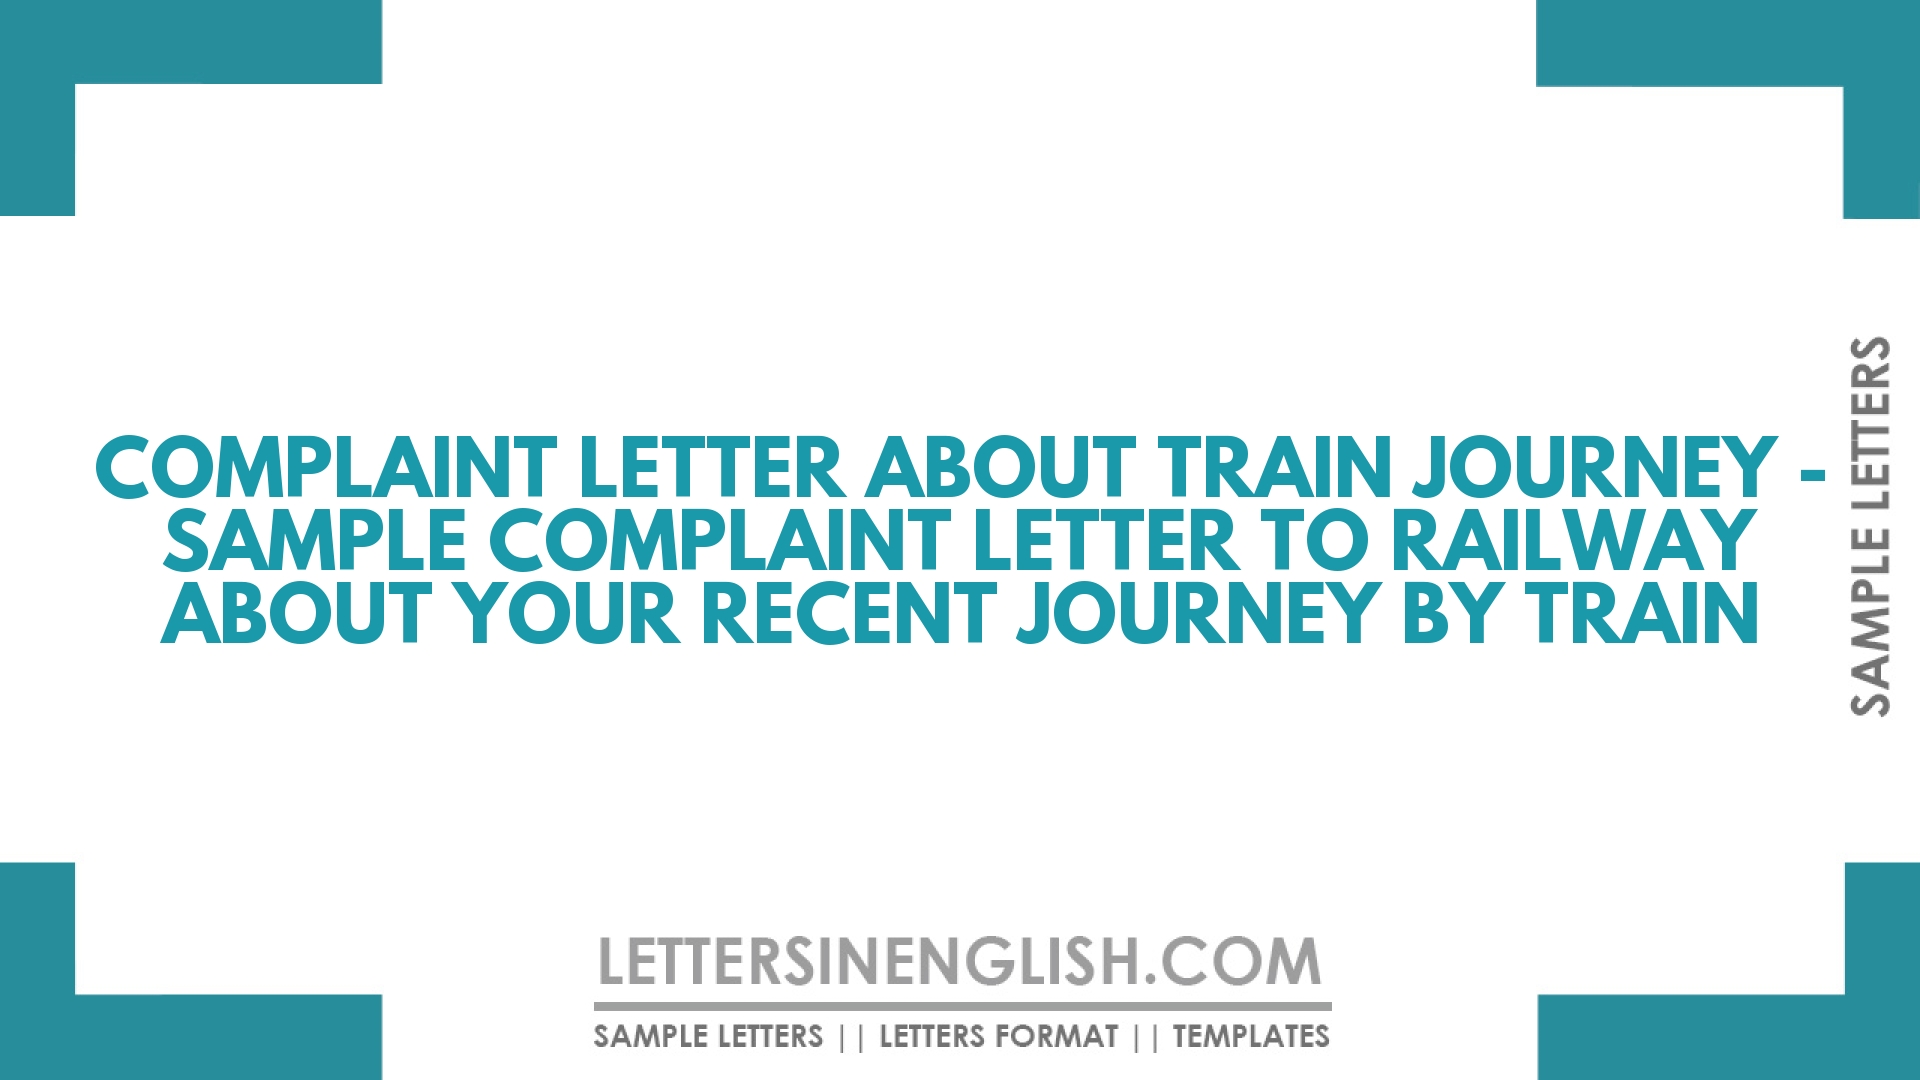 Complaint Letter About Train Journey – Sample Complaint Letter to Railway About Your Recent Journey By Train